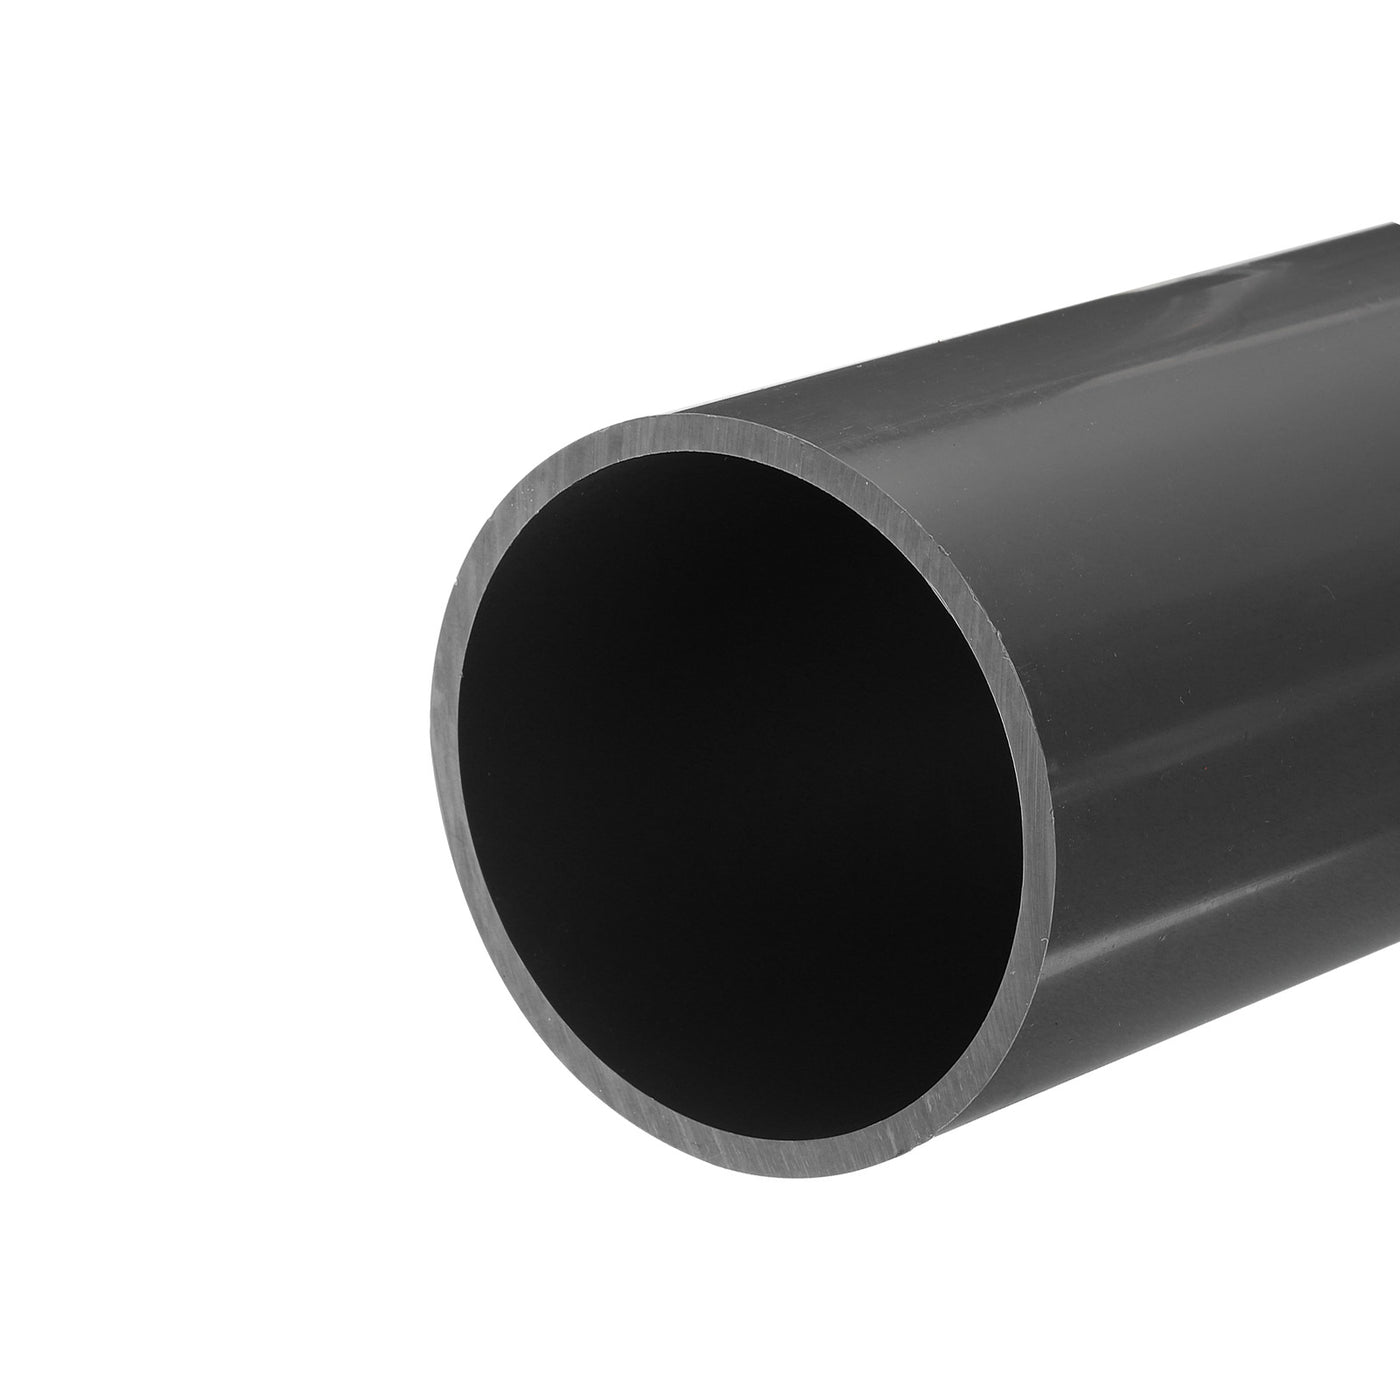 Harfington PVC Rigid Round Pipe 81.4mm ID 90mm OD 20cm/8" Length Light Grey High Impact for Water Pipe, Crafts, Cable Sleeve